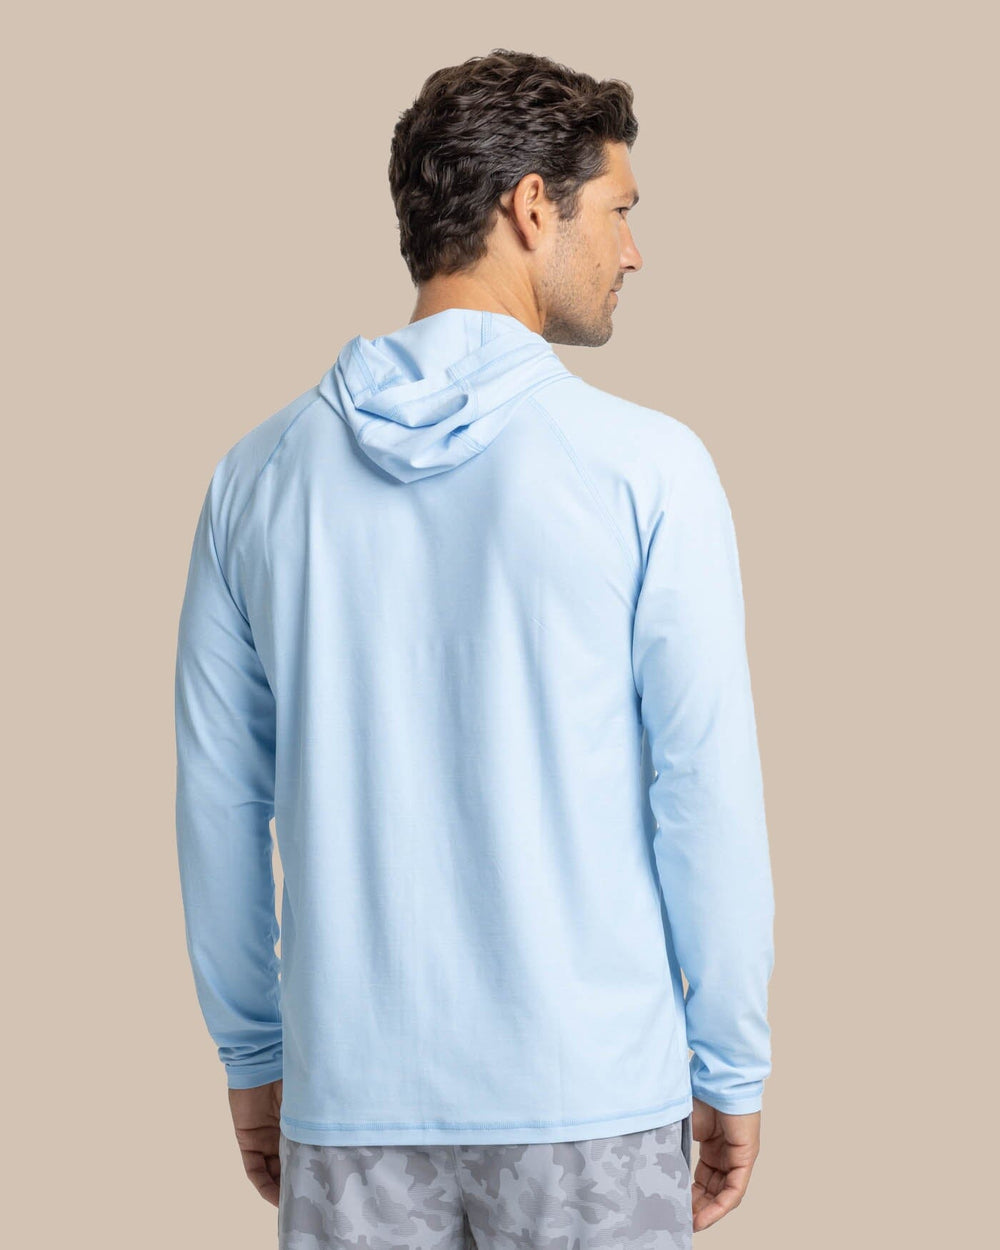 The back view of the Southern Tide brrr illiant Performance Hoodie by Southern Tide - Clearwater Blue